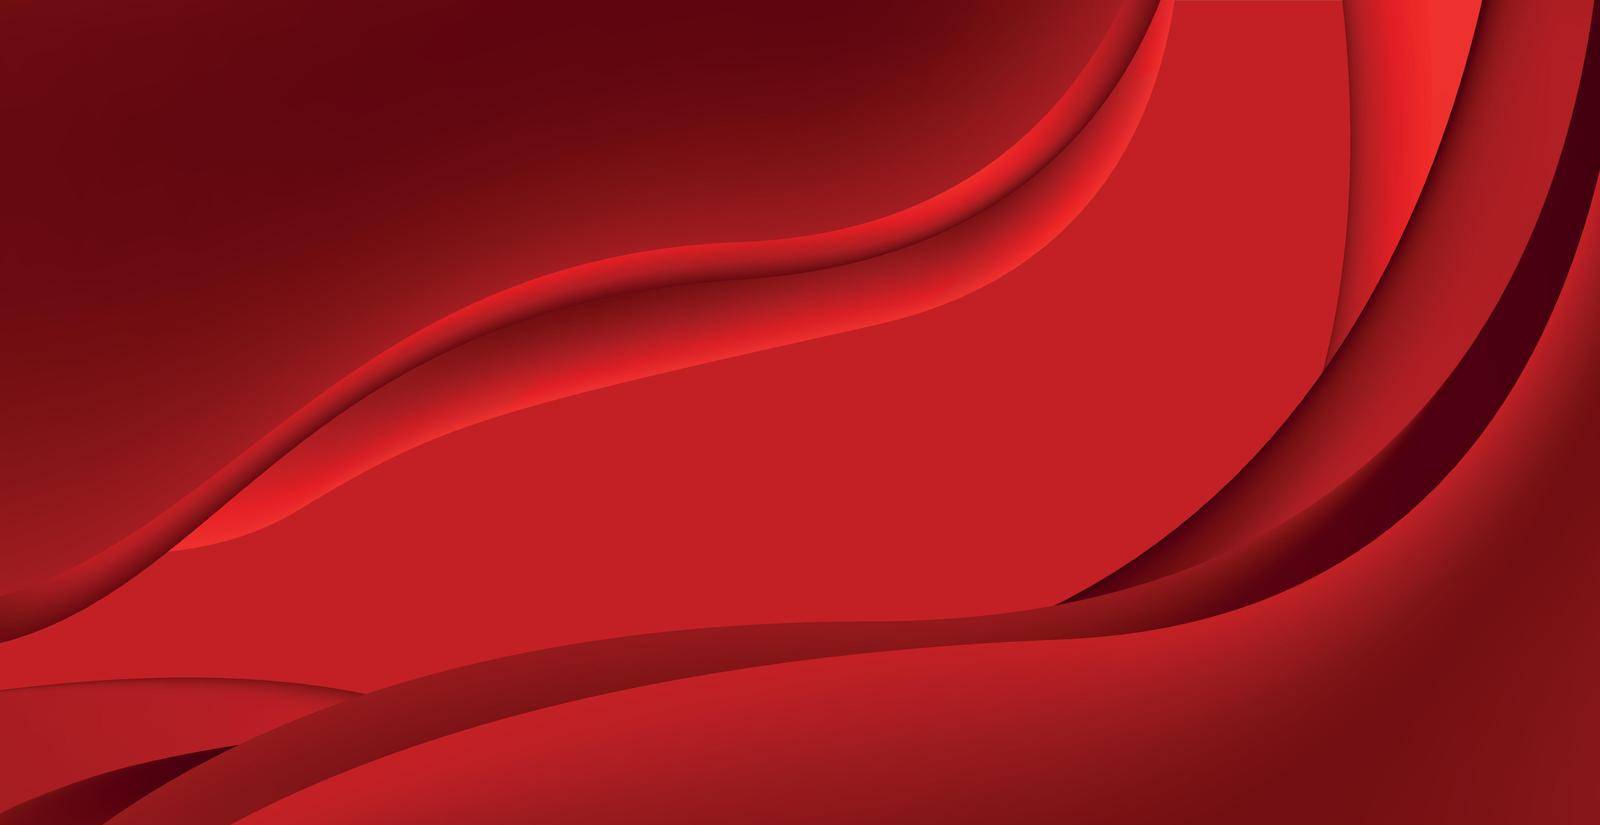 Volumetric lines on a red background - panoramic background